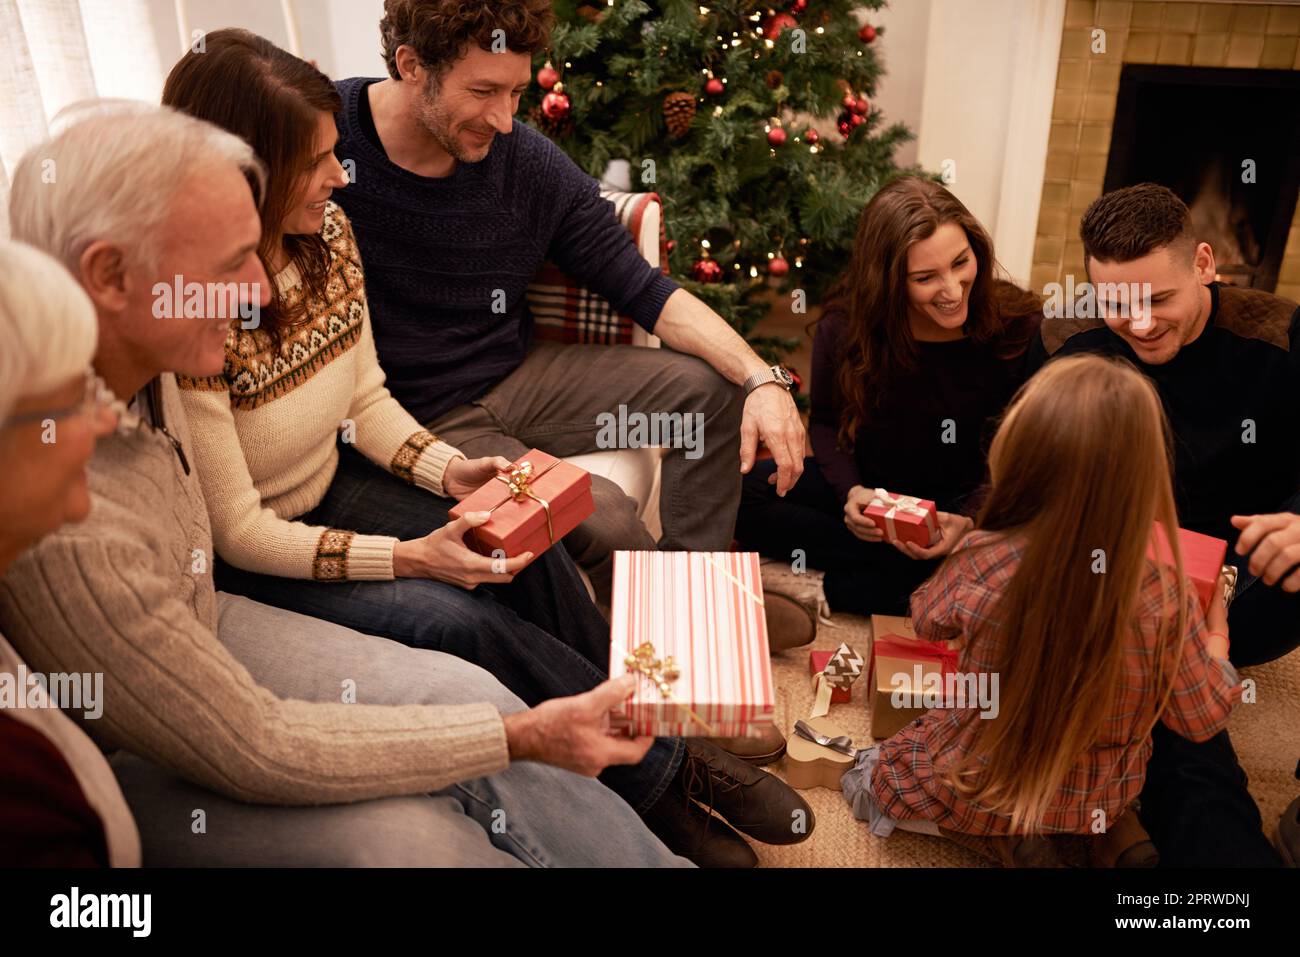 Enjoying a cosy family Christmas. a a family giving presents at christmas. Stock Photo